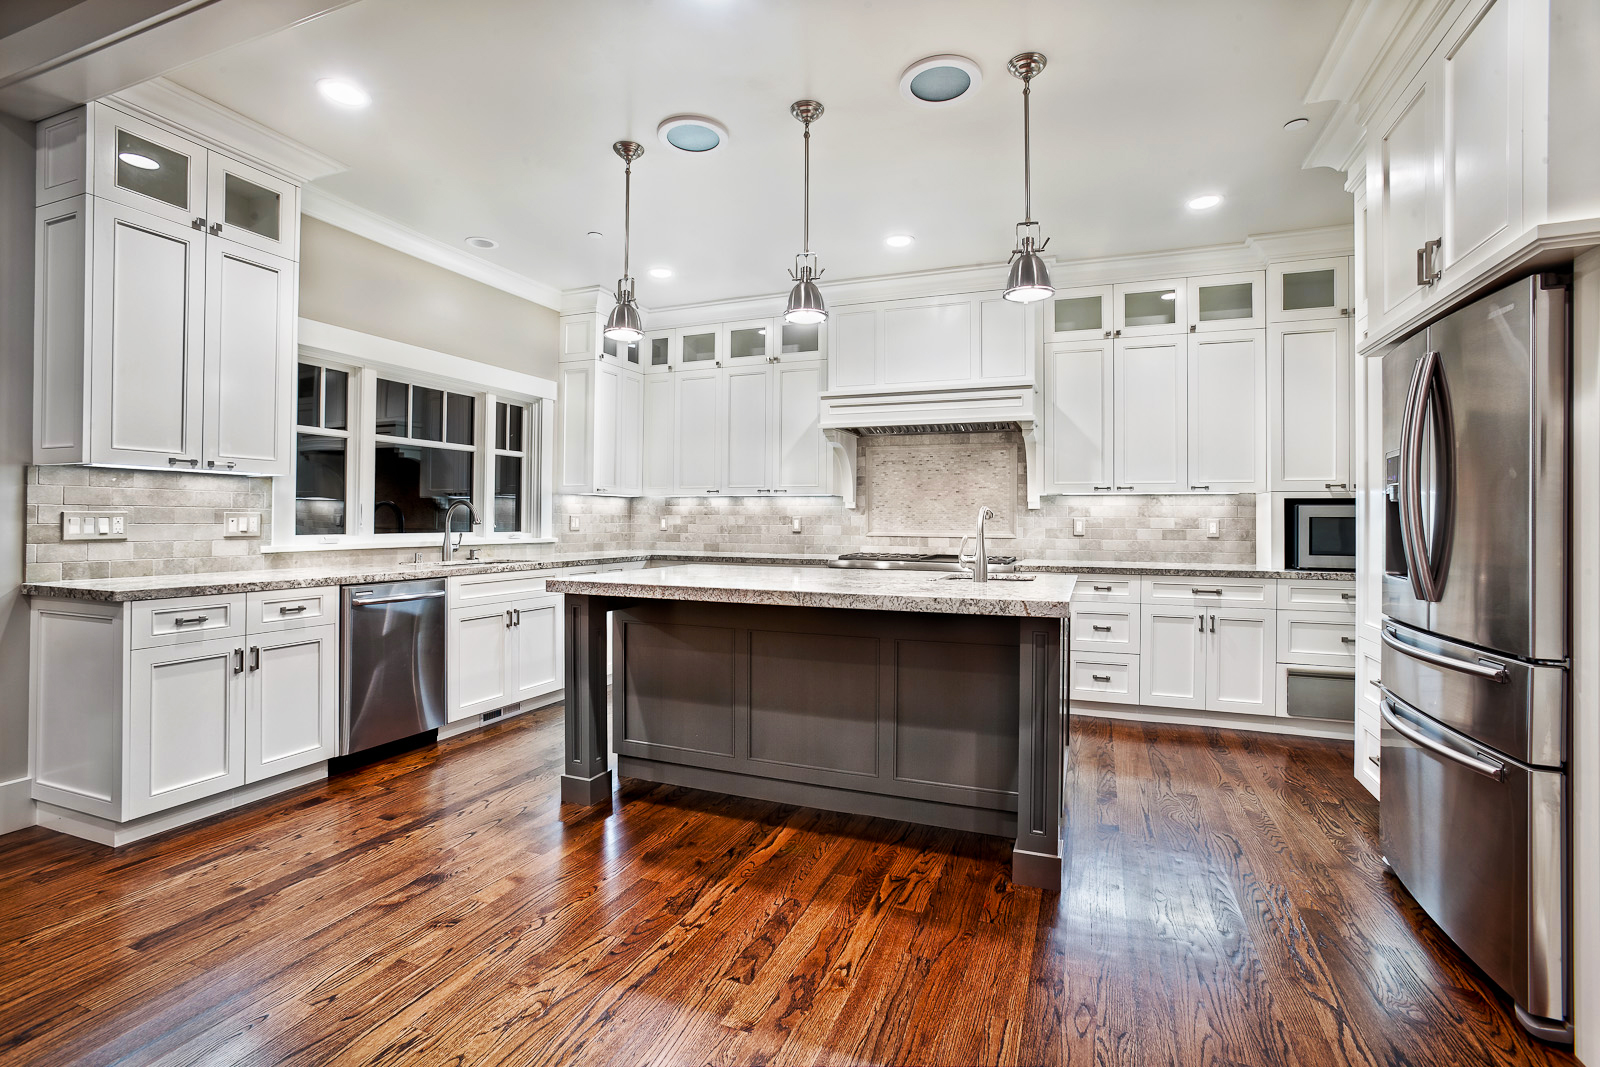 Ideas for Custom Kitchen Cabinets | Roy Home Design